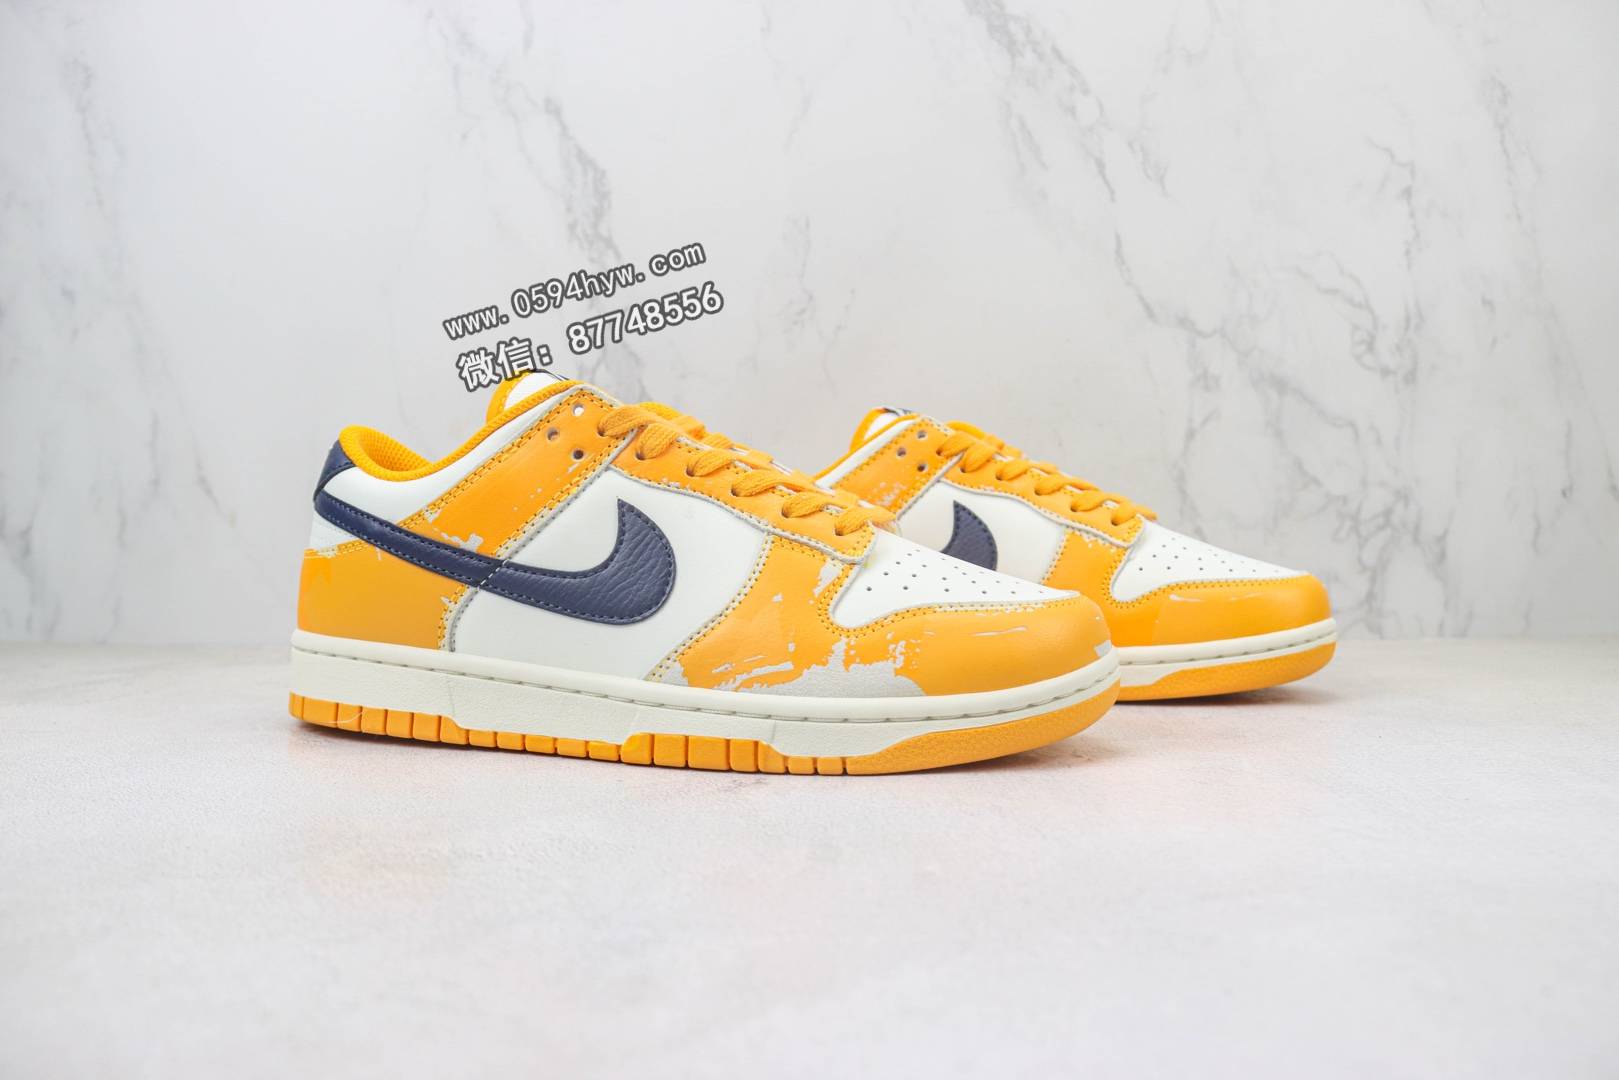 做旧, OW, Nike Dunk Low, Nike Dunk, NIKE, Dunk Low, Dunk - Nike Dunk Low Wear and Tear 刷漆 做旧 复古 白橙 深蓝勾 FN3418-100